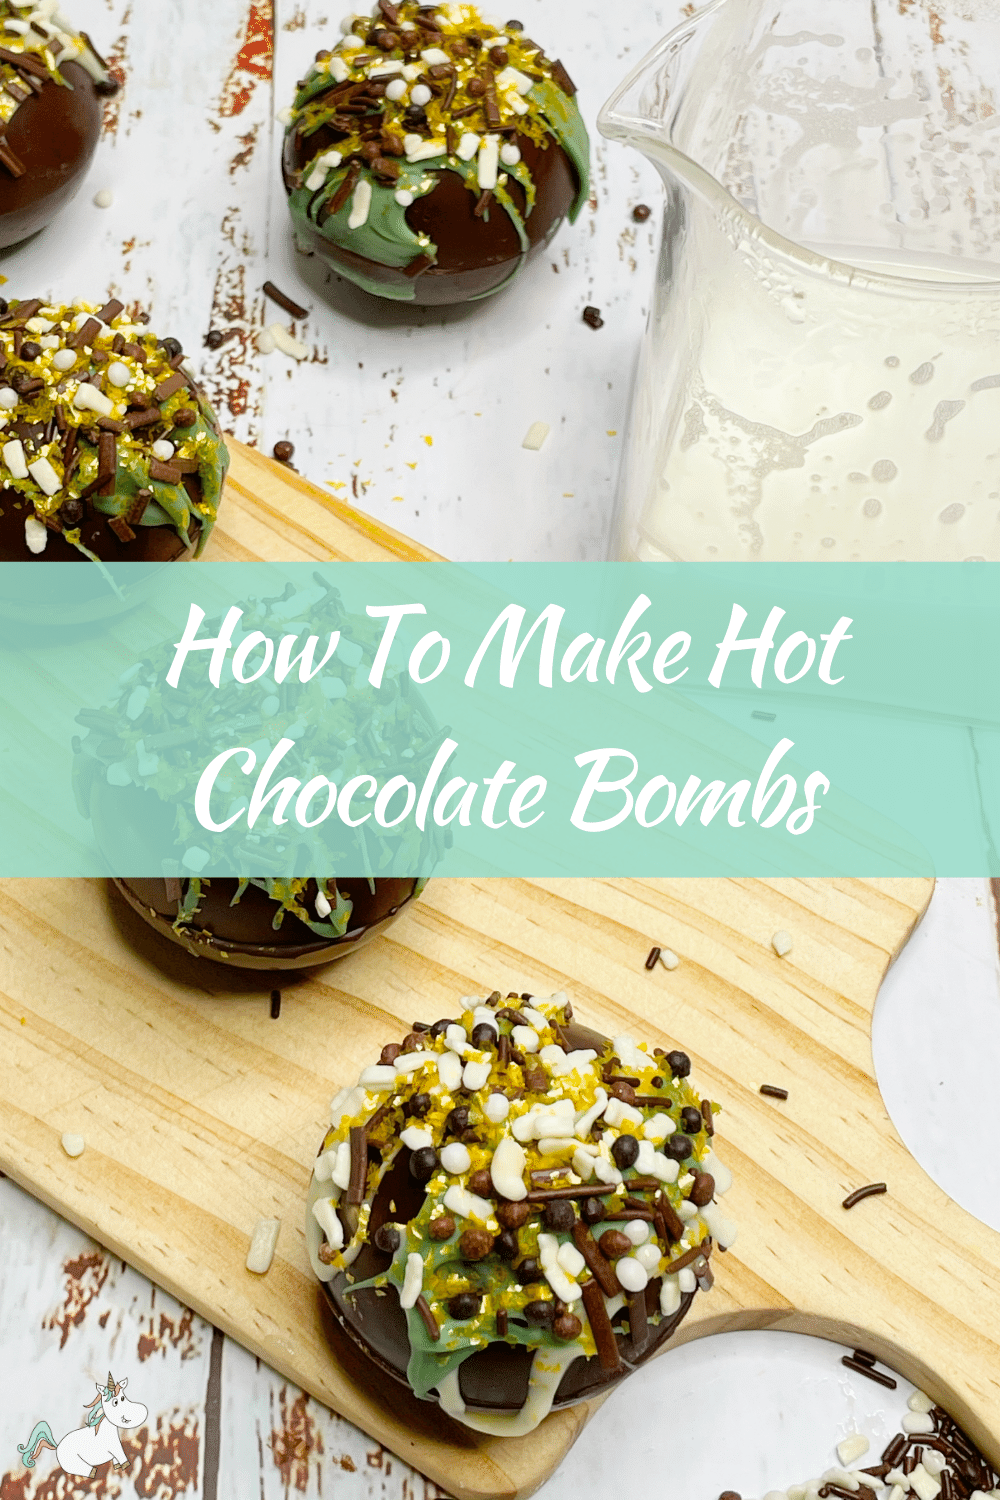 How to make hot chocolate bombs that are easy and delicious!